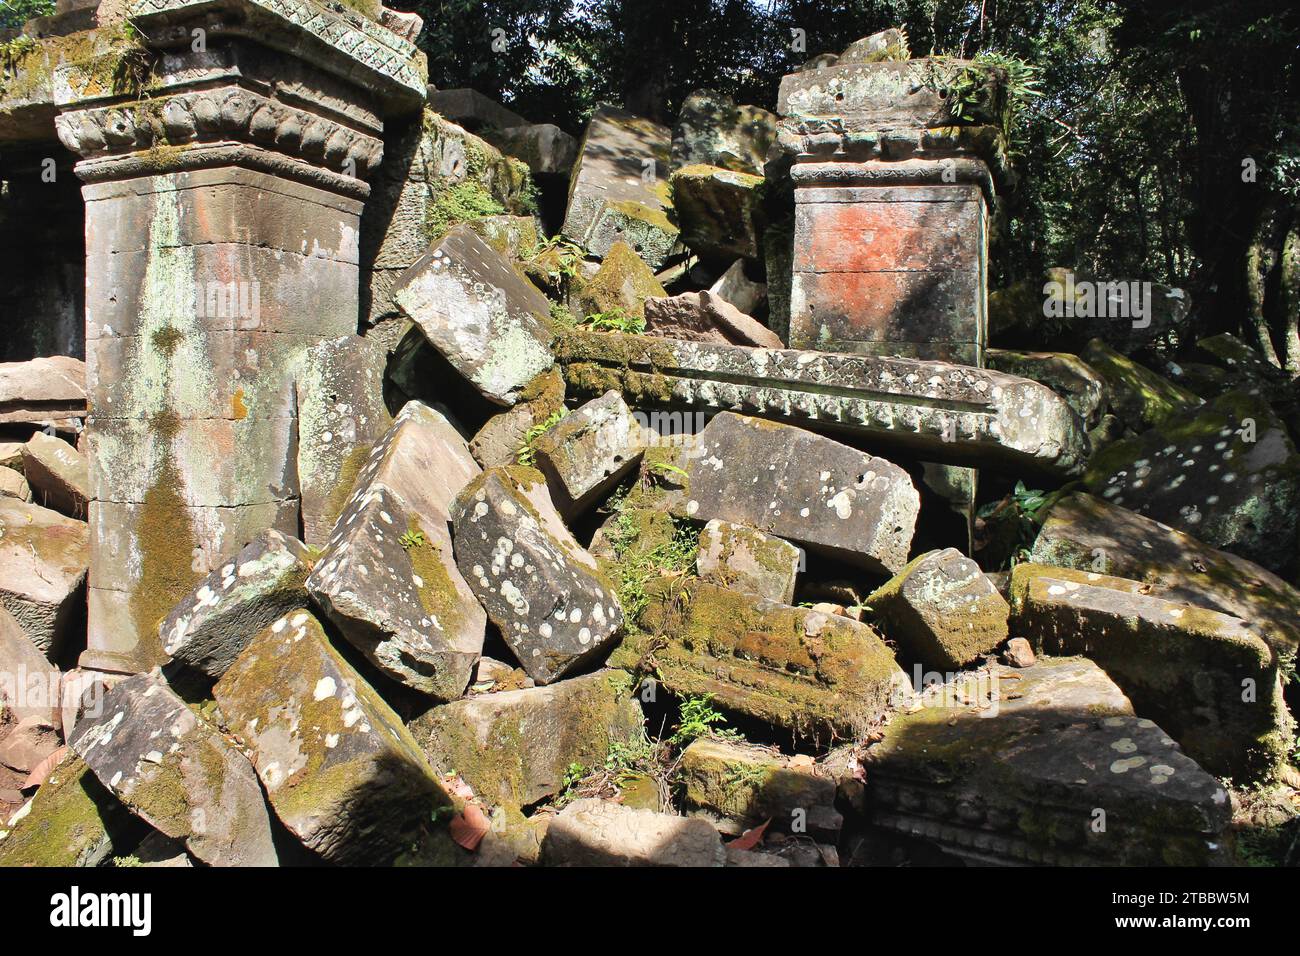 Tumbled down temple stones, some with moss and lichen covered carvings piled among the ancient ruins in Cambodia's Angkor Archaeological Park. Stock Photo